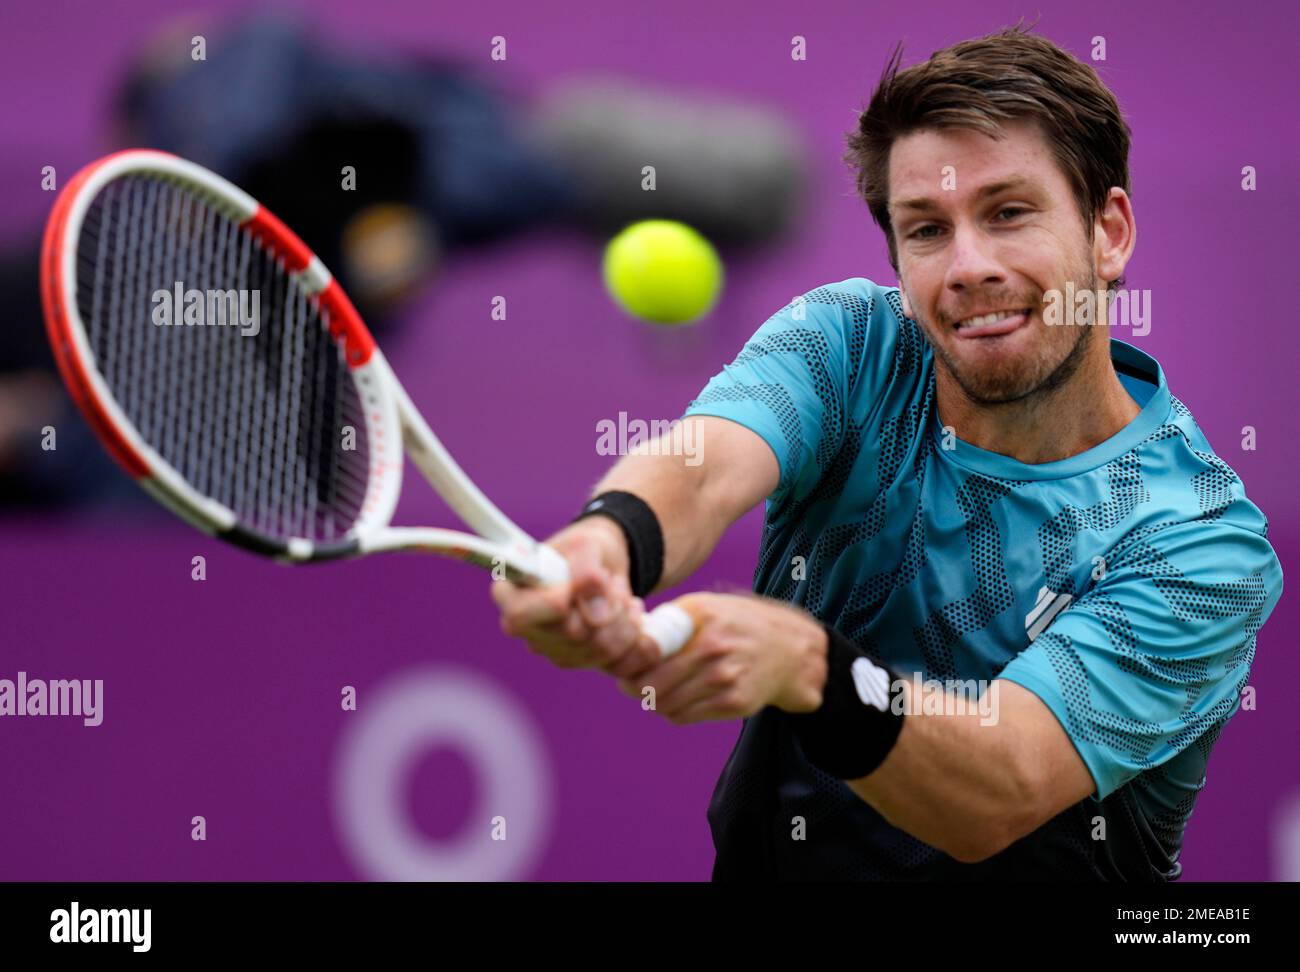 Cameron Norrie of Britain returns to Matteo Berrettini of Italy during their final singles tennis match at the Queens Club tournament in London, Sunday, June 20, 2021